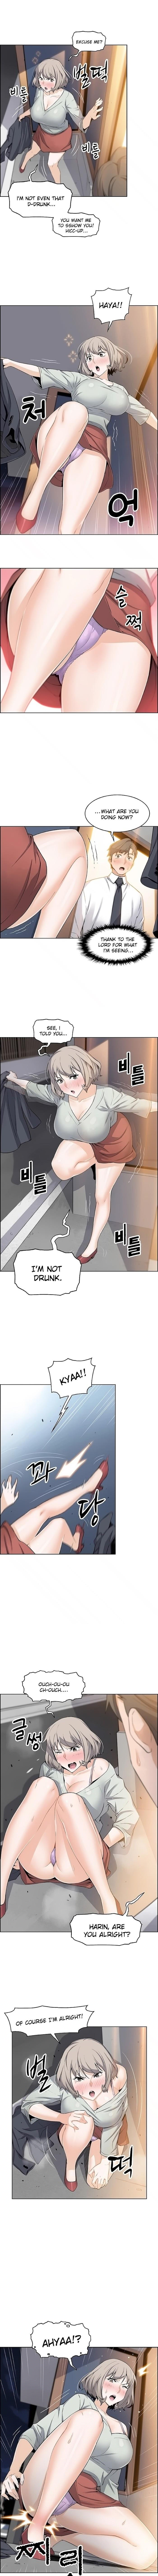 Housekeeper [Neck Pillow, Paper] Ch.49/49 [English] [Manhwa PDF] Completed 163